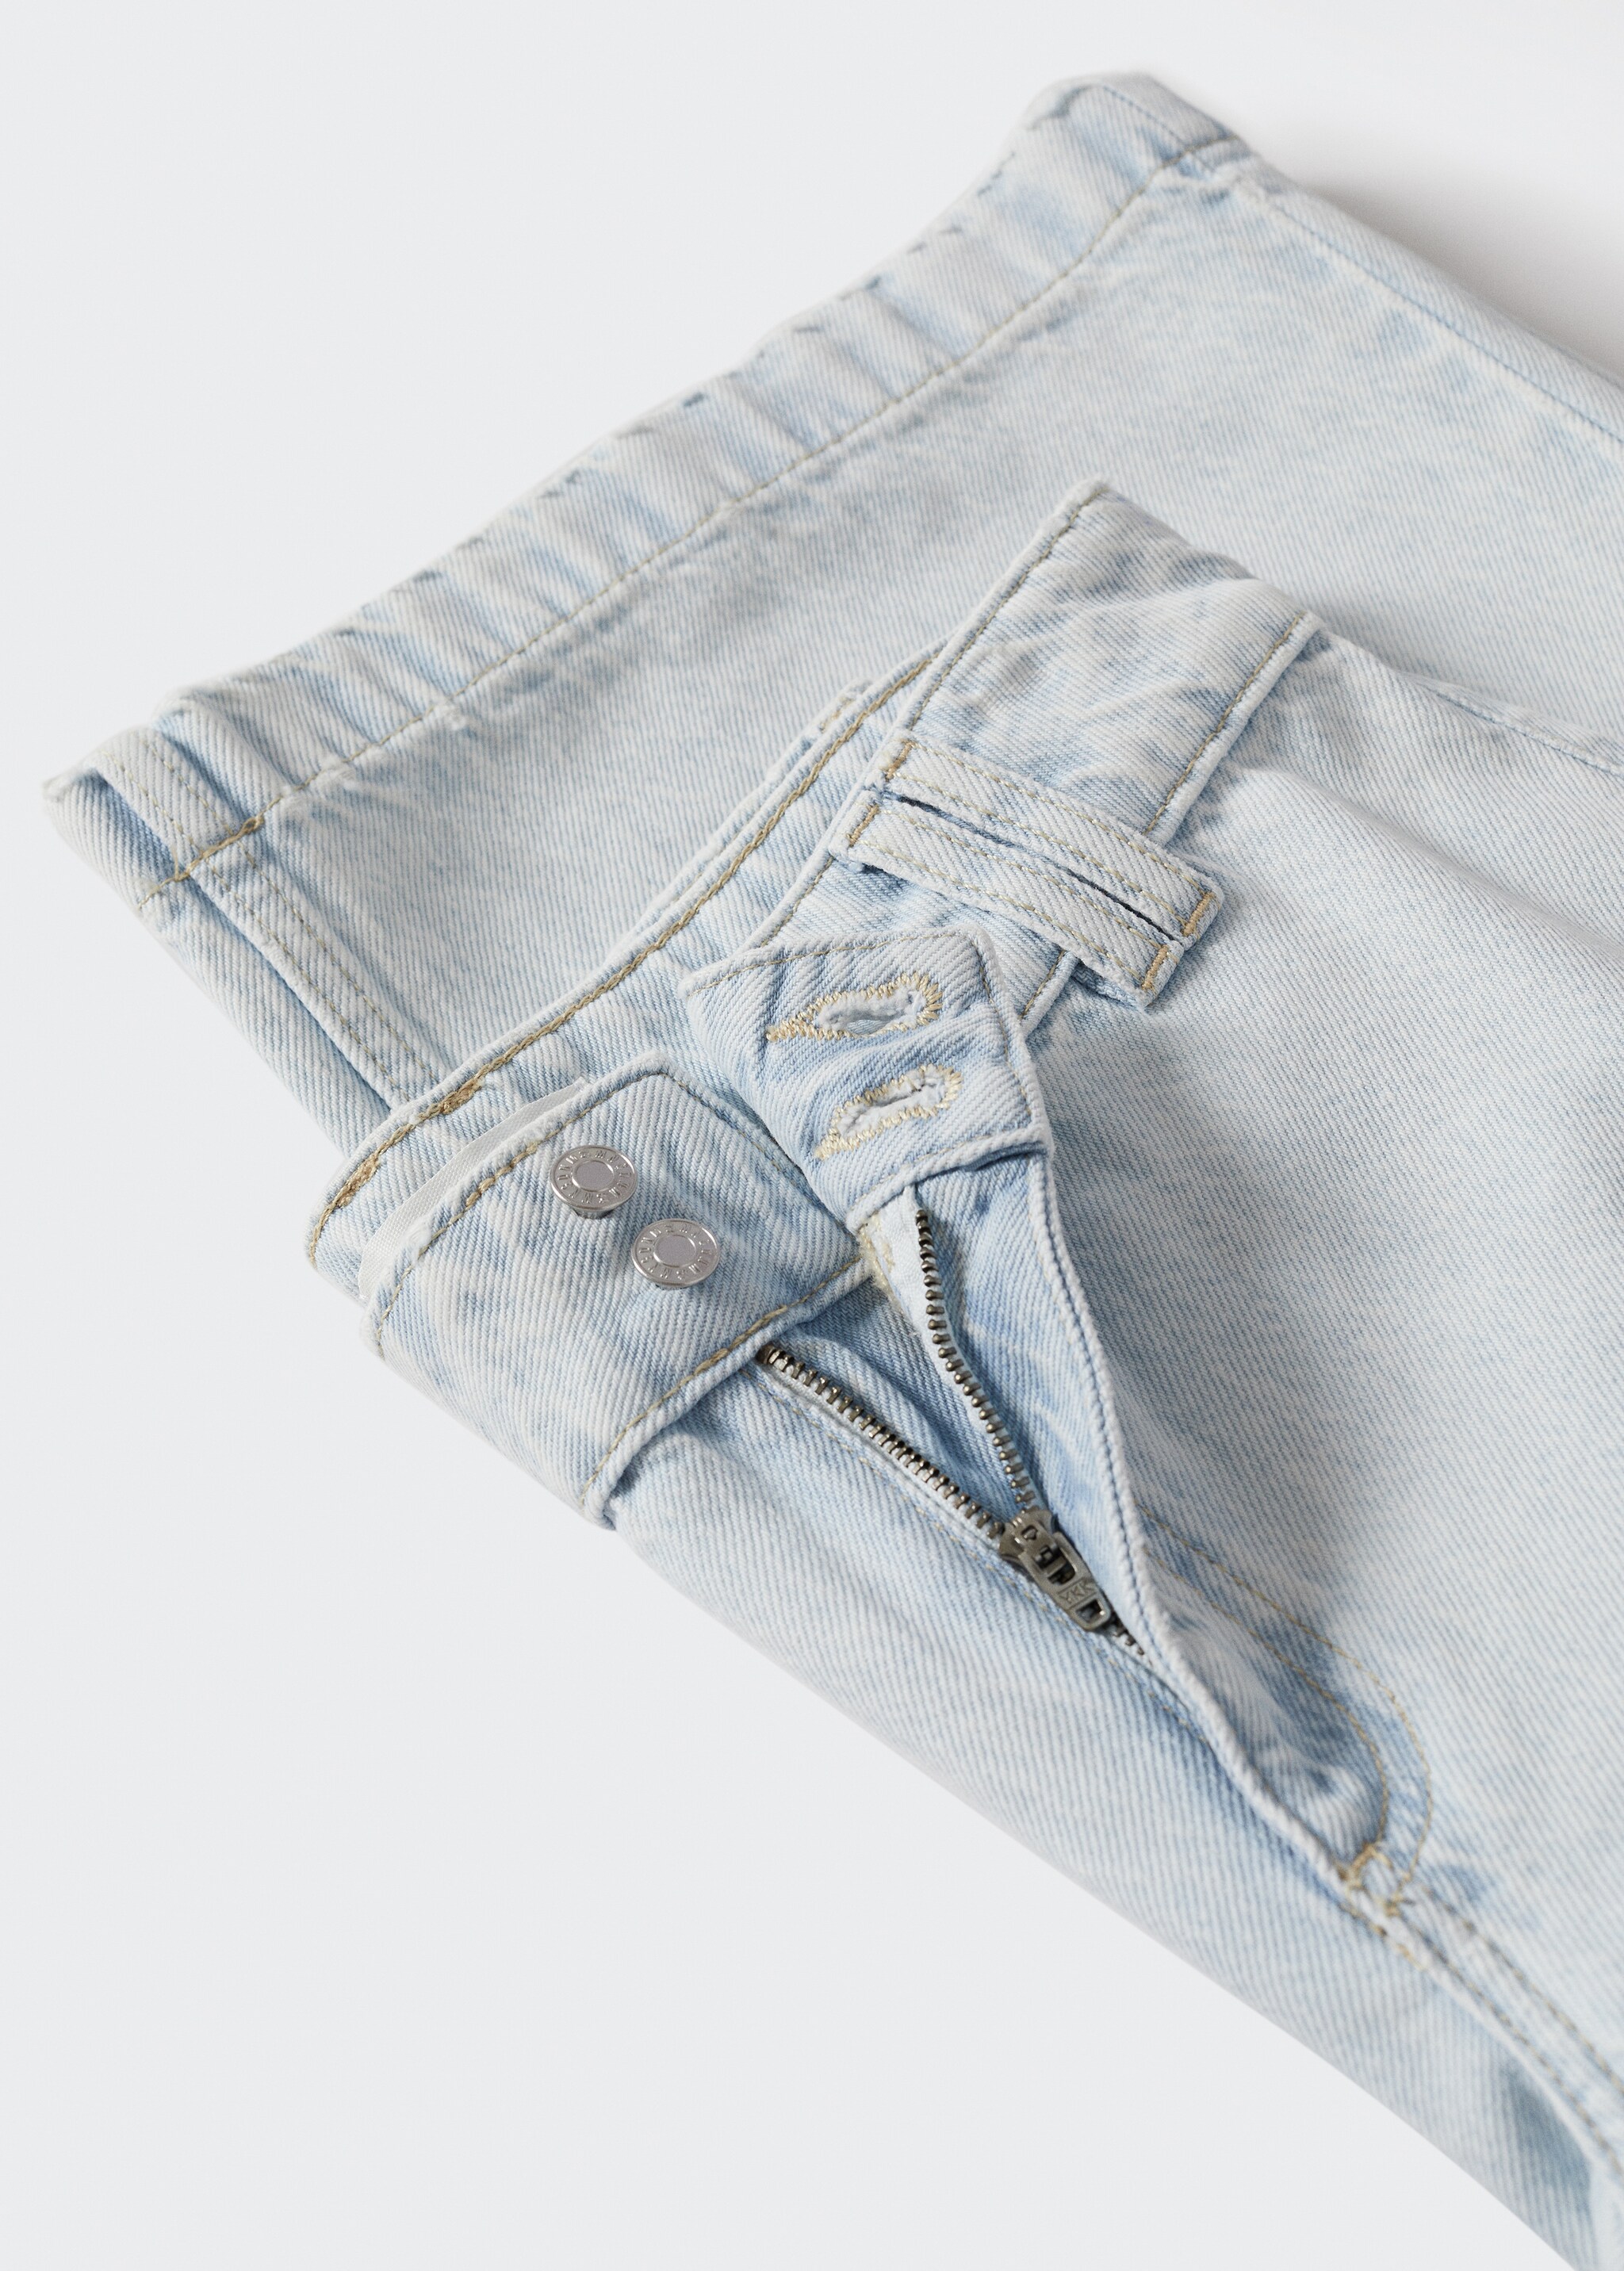 Mid-rise wideleg jeans - Details of the article 8